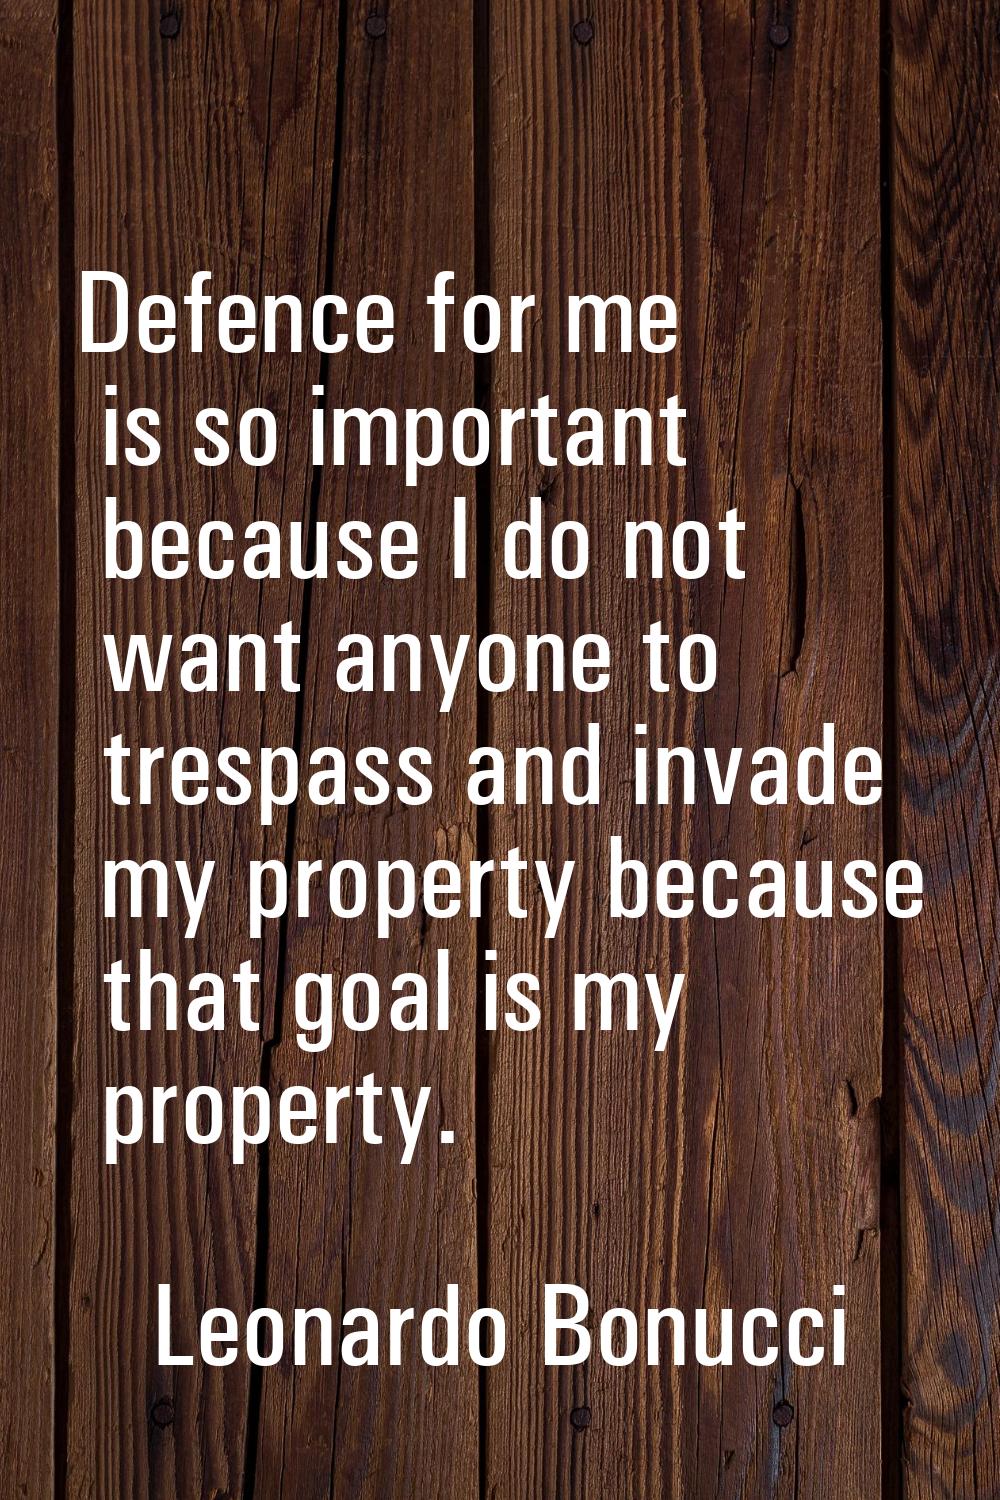 Defence for me is so important because I do not want anyone to trespass and invade my property beca